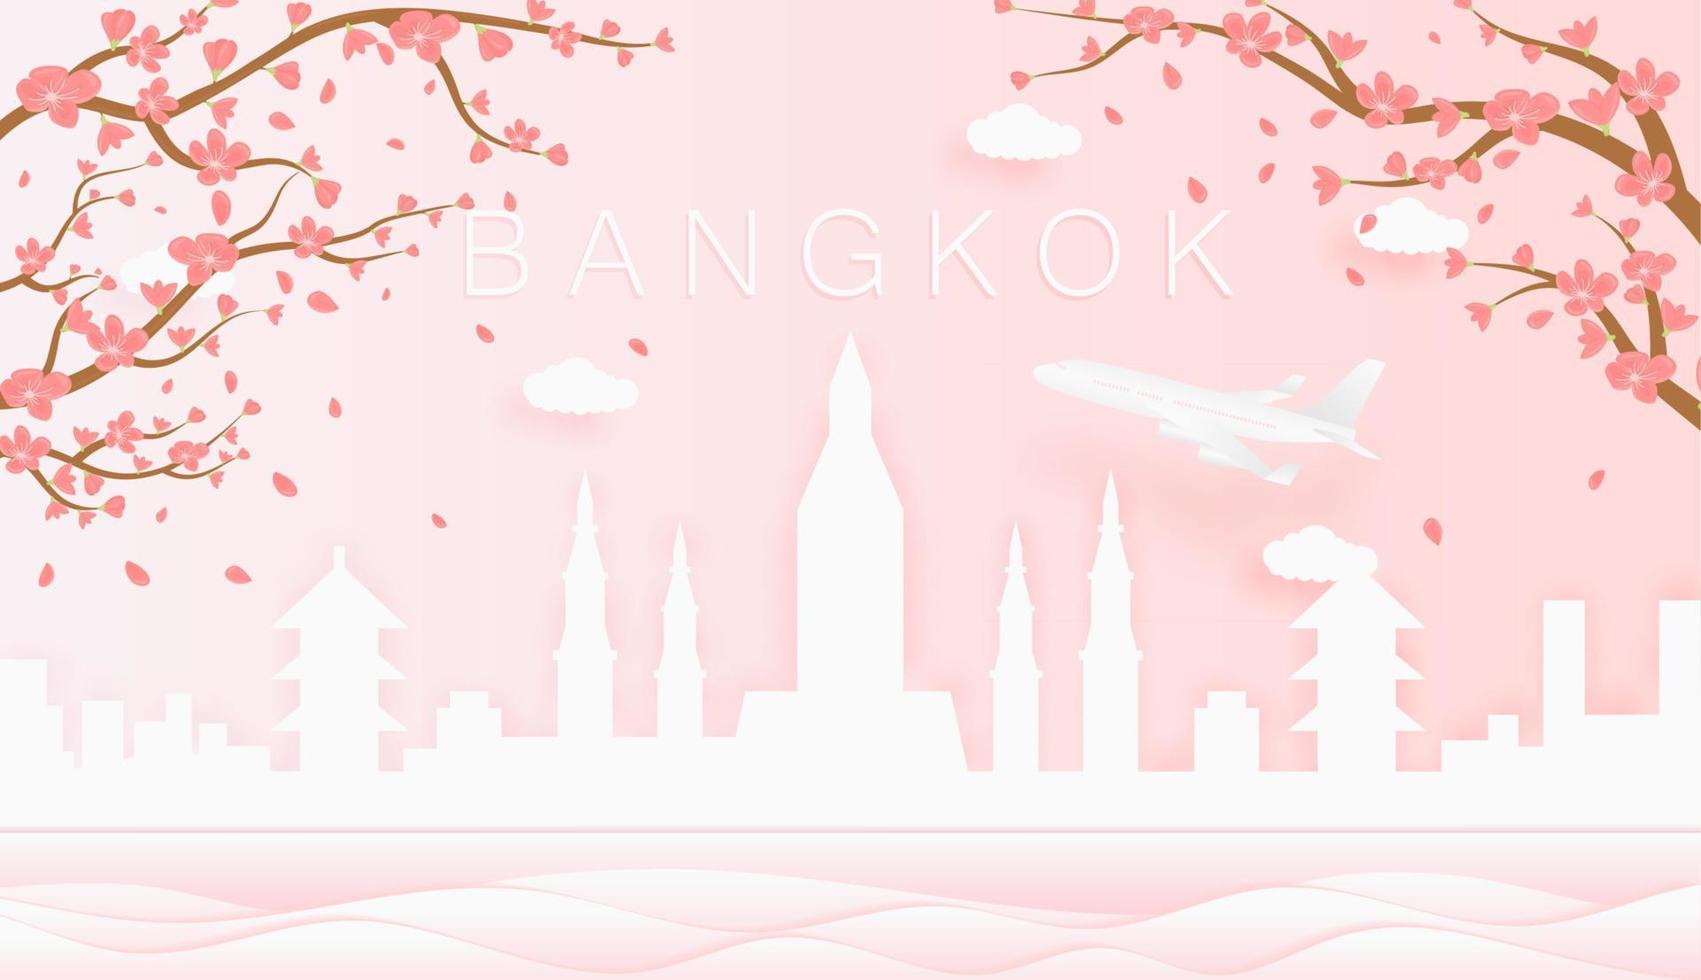 Panorama travel postcard, poster, tour advertising of world famous landmarks of Bangkok, spring season with blooming flowers in tree vector icon